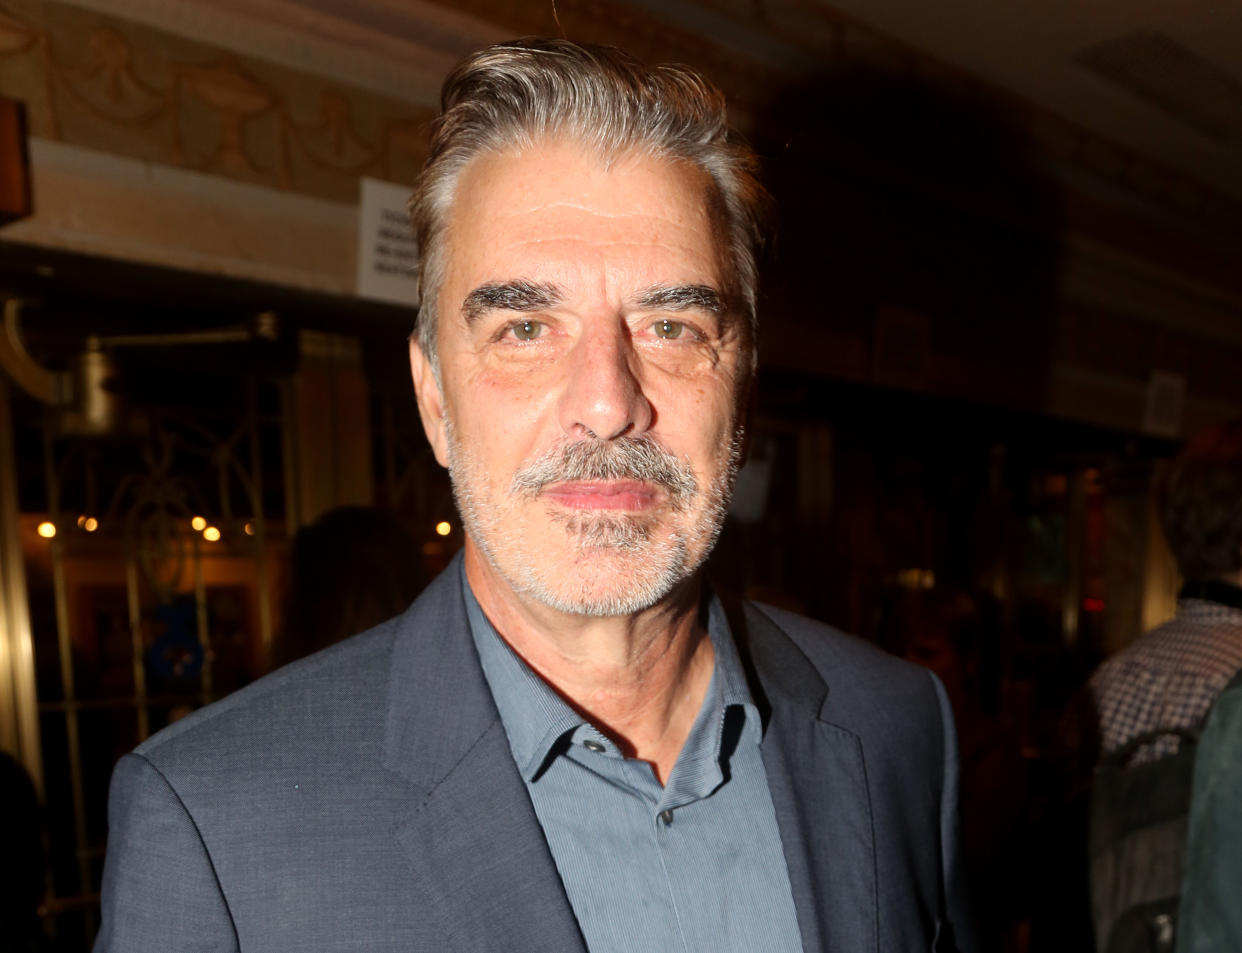 Chris Noth opens up about sexual assault scandal for the first time and once again denies the allegations.